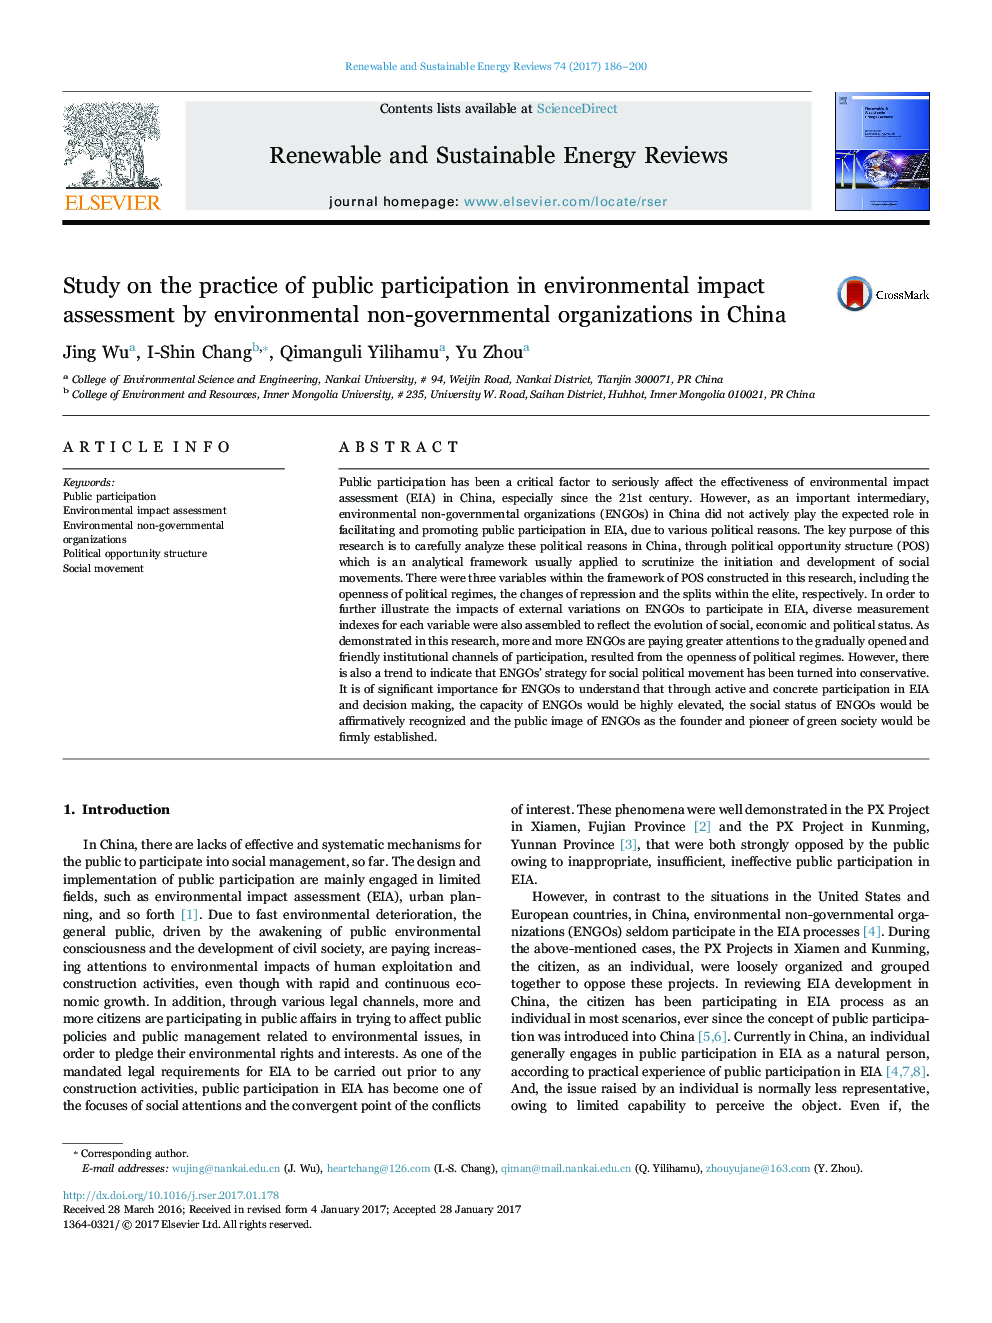 Study on the practice of public participation in environmental impact assessment by environmental non-governmental organizations in China